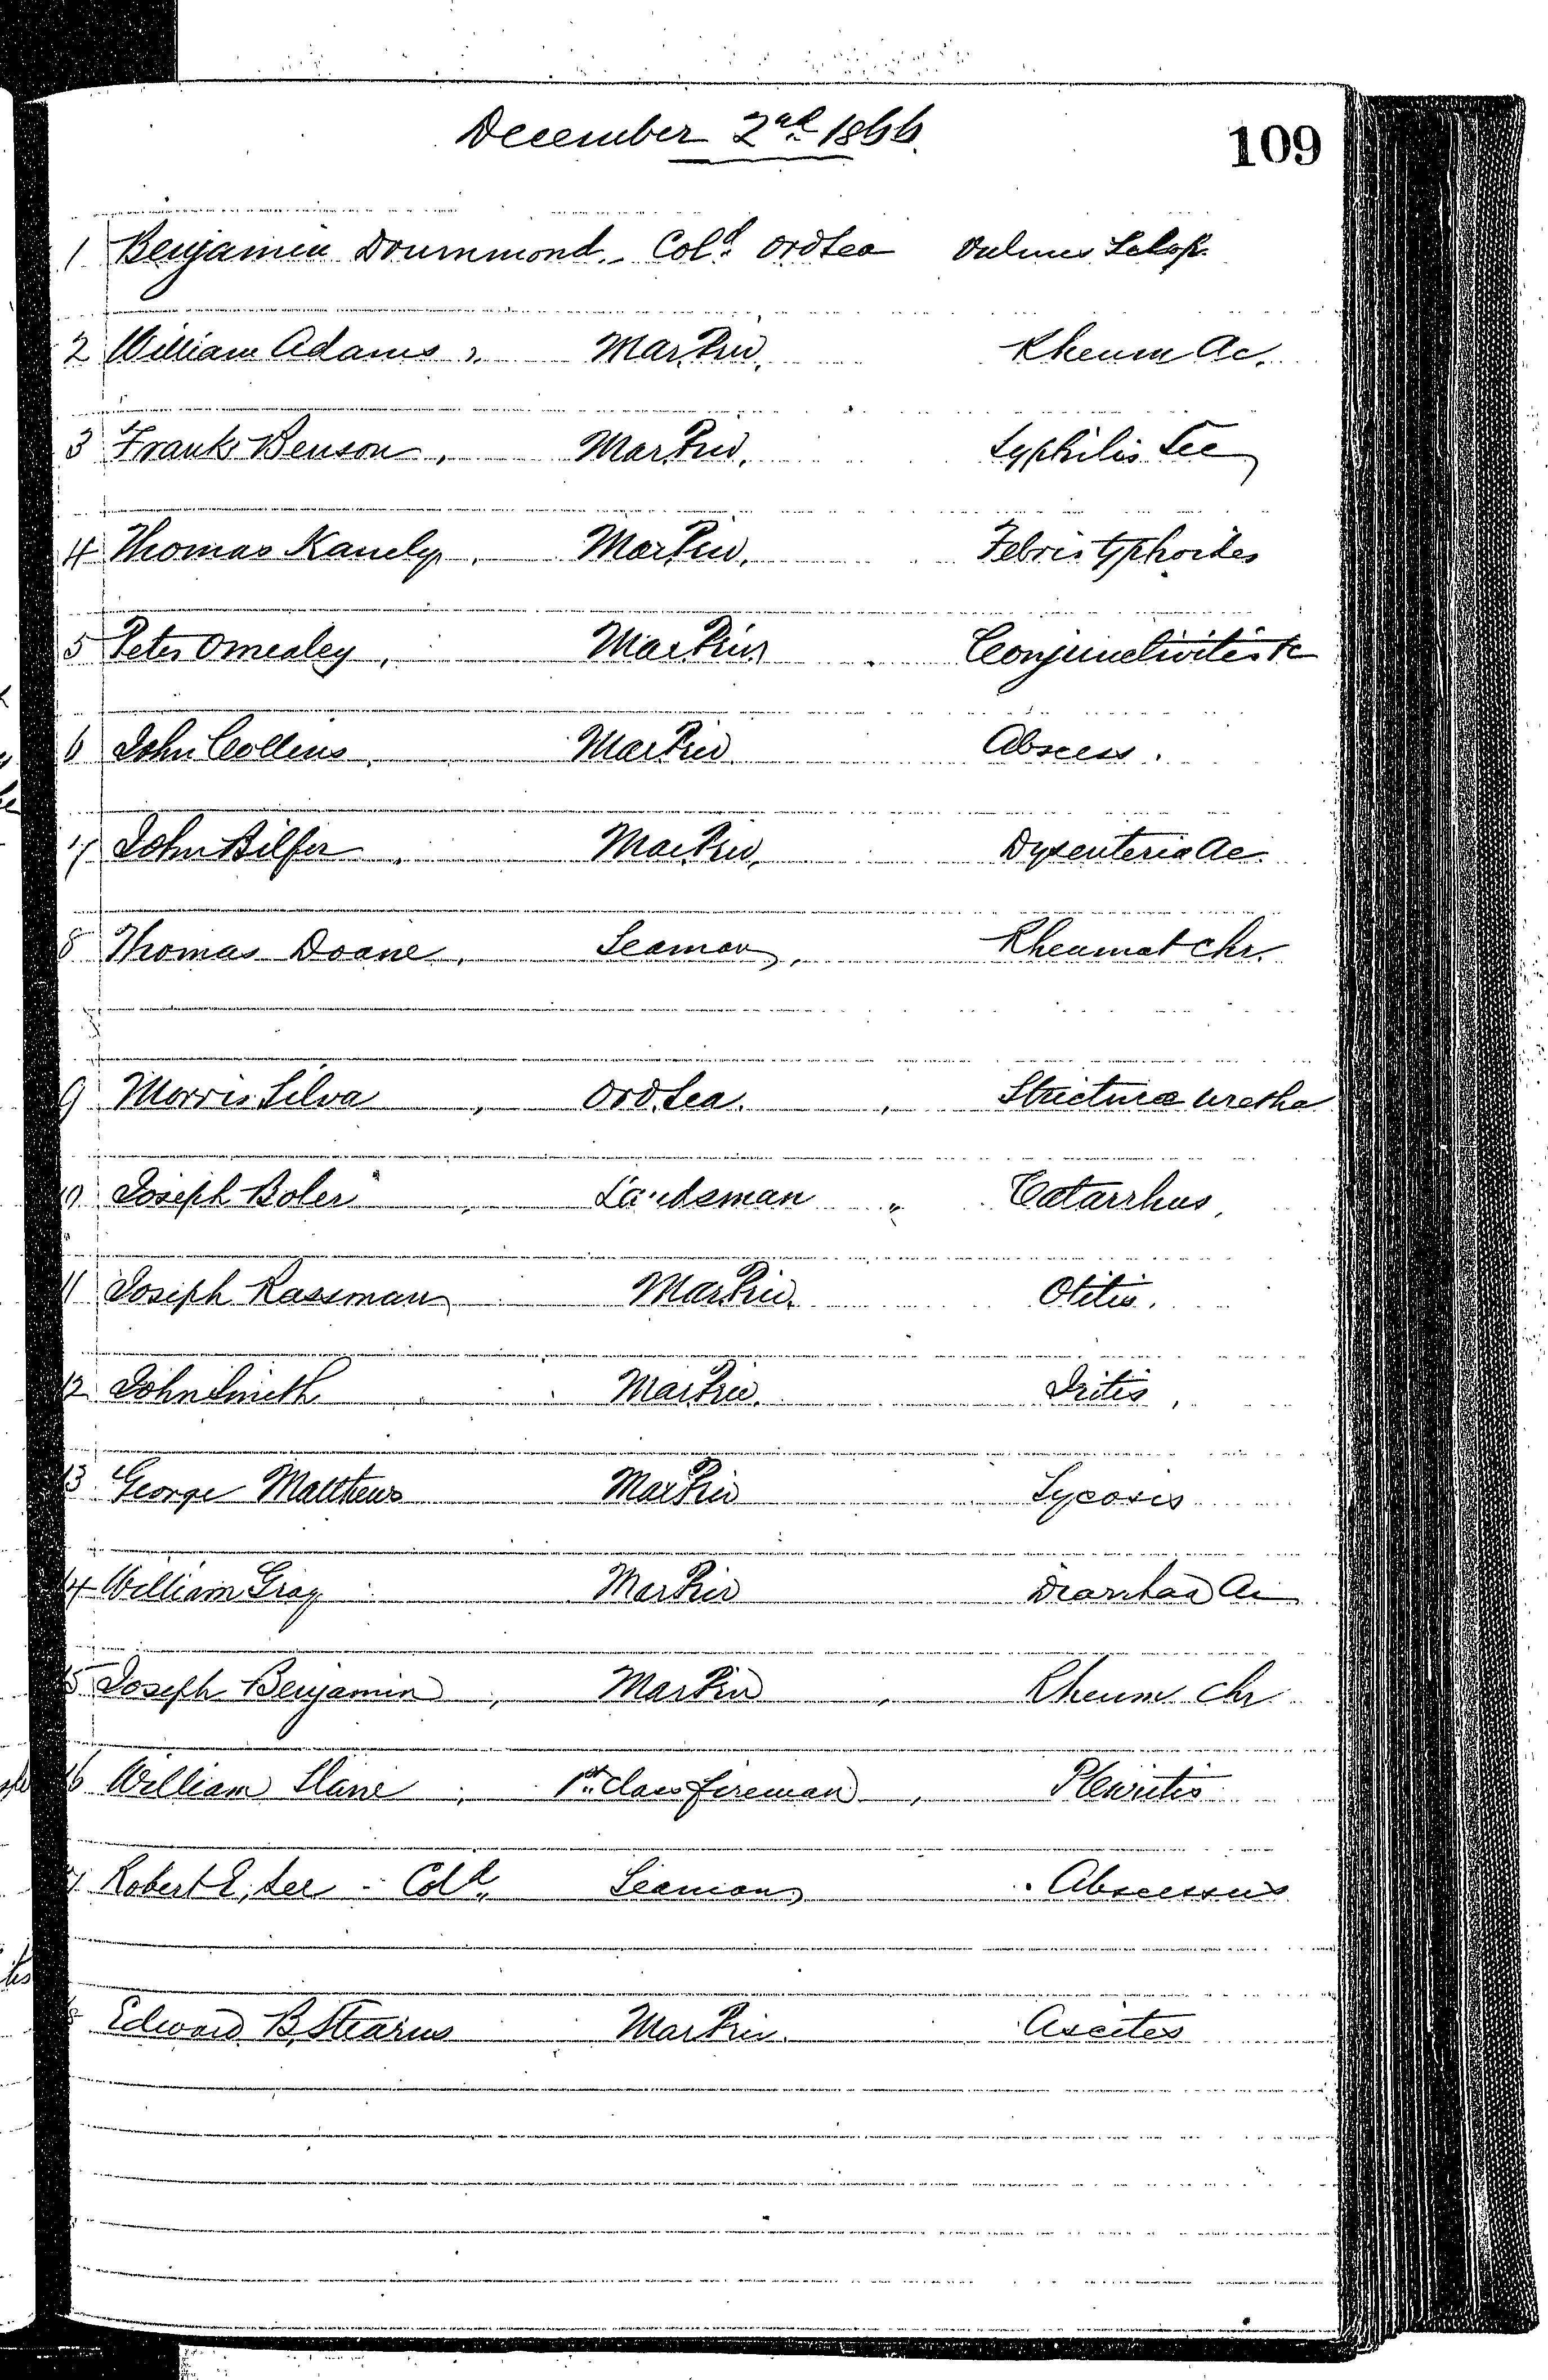 Patients in the Naval Hospital, Washington DC, on December 2, 1866, page 1 of 2, in the Medical Journal, October 1, 1866 to March 20, 1867